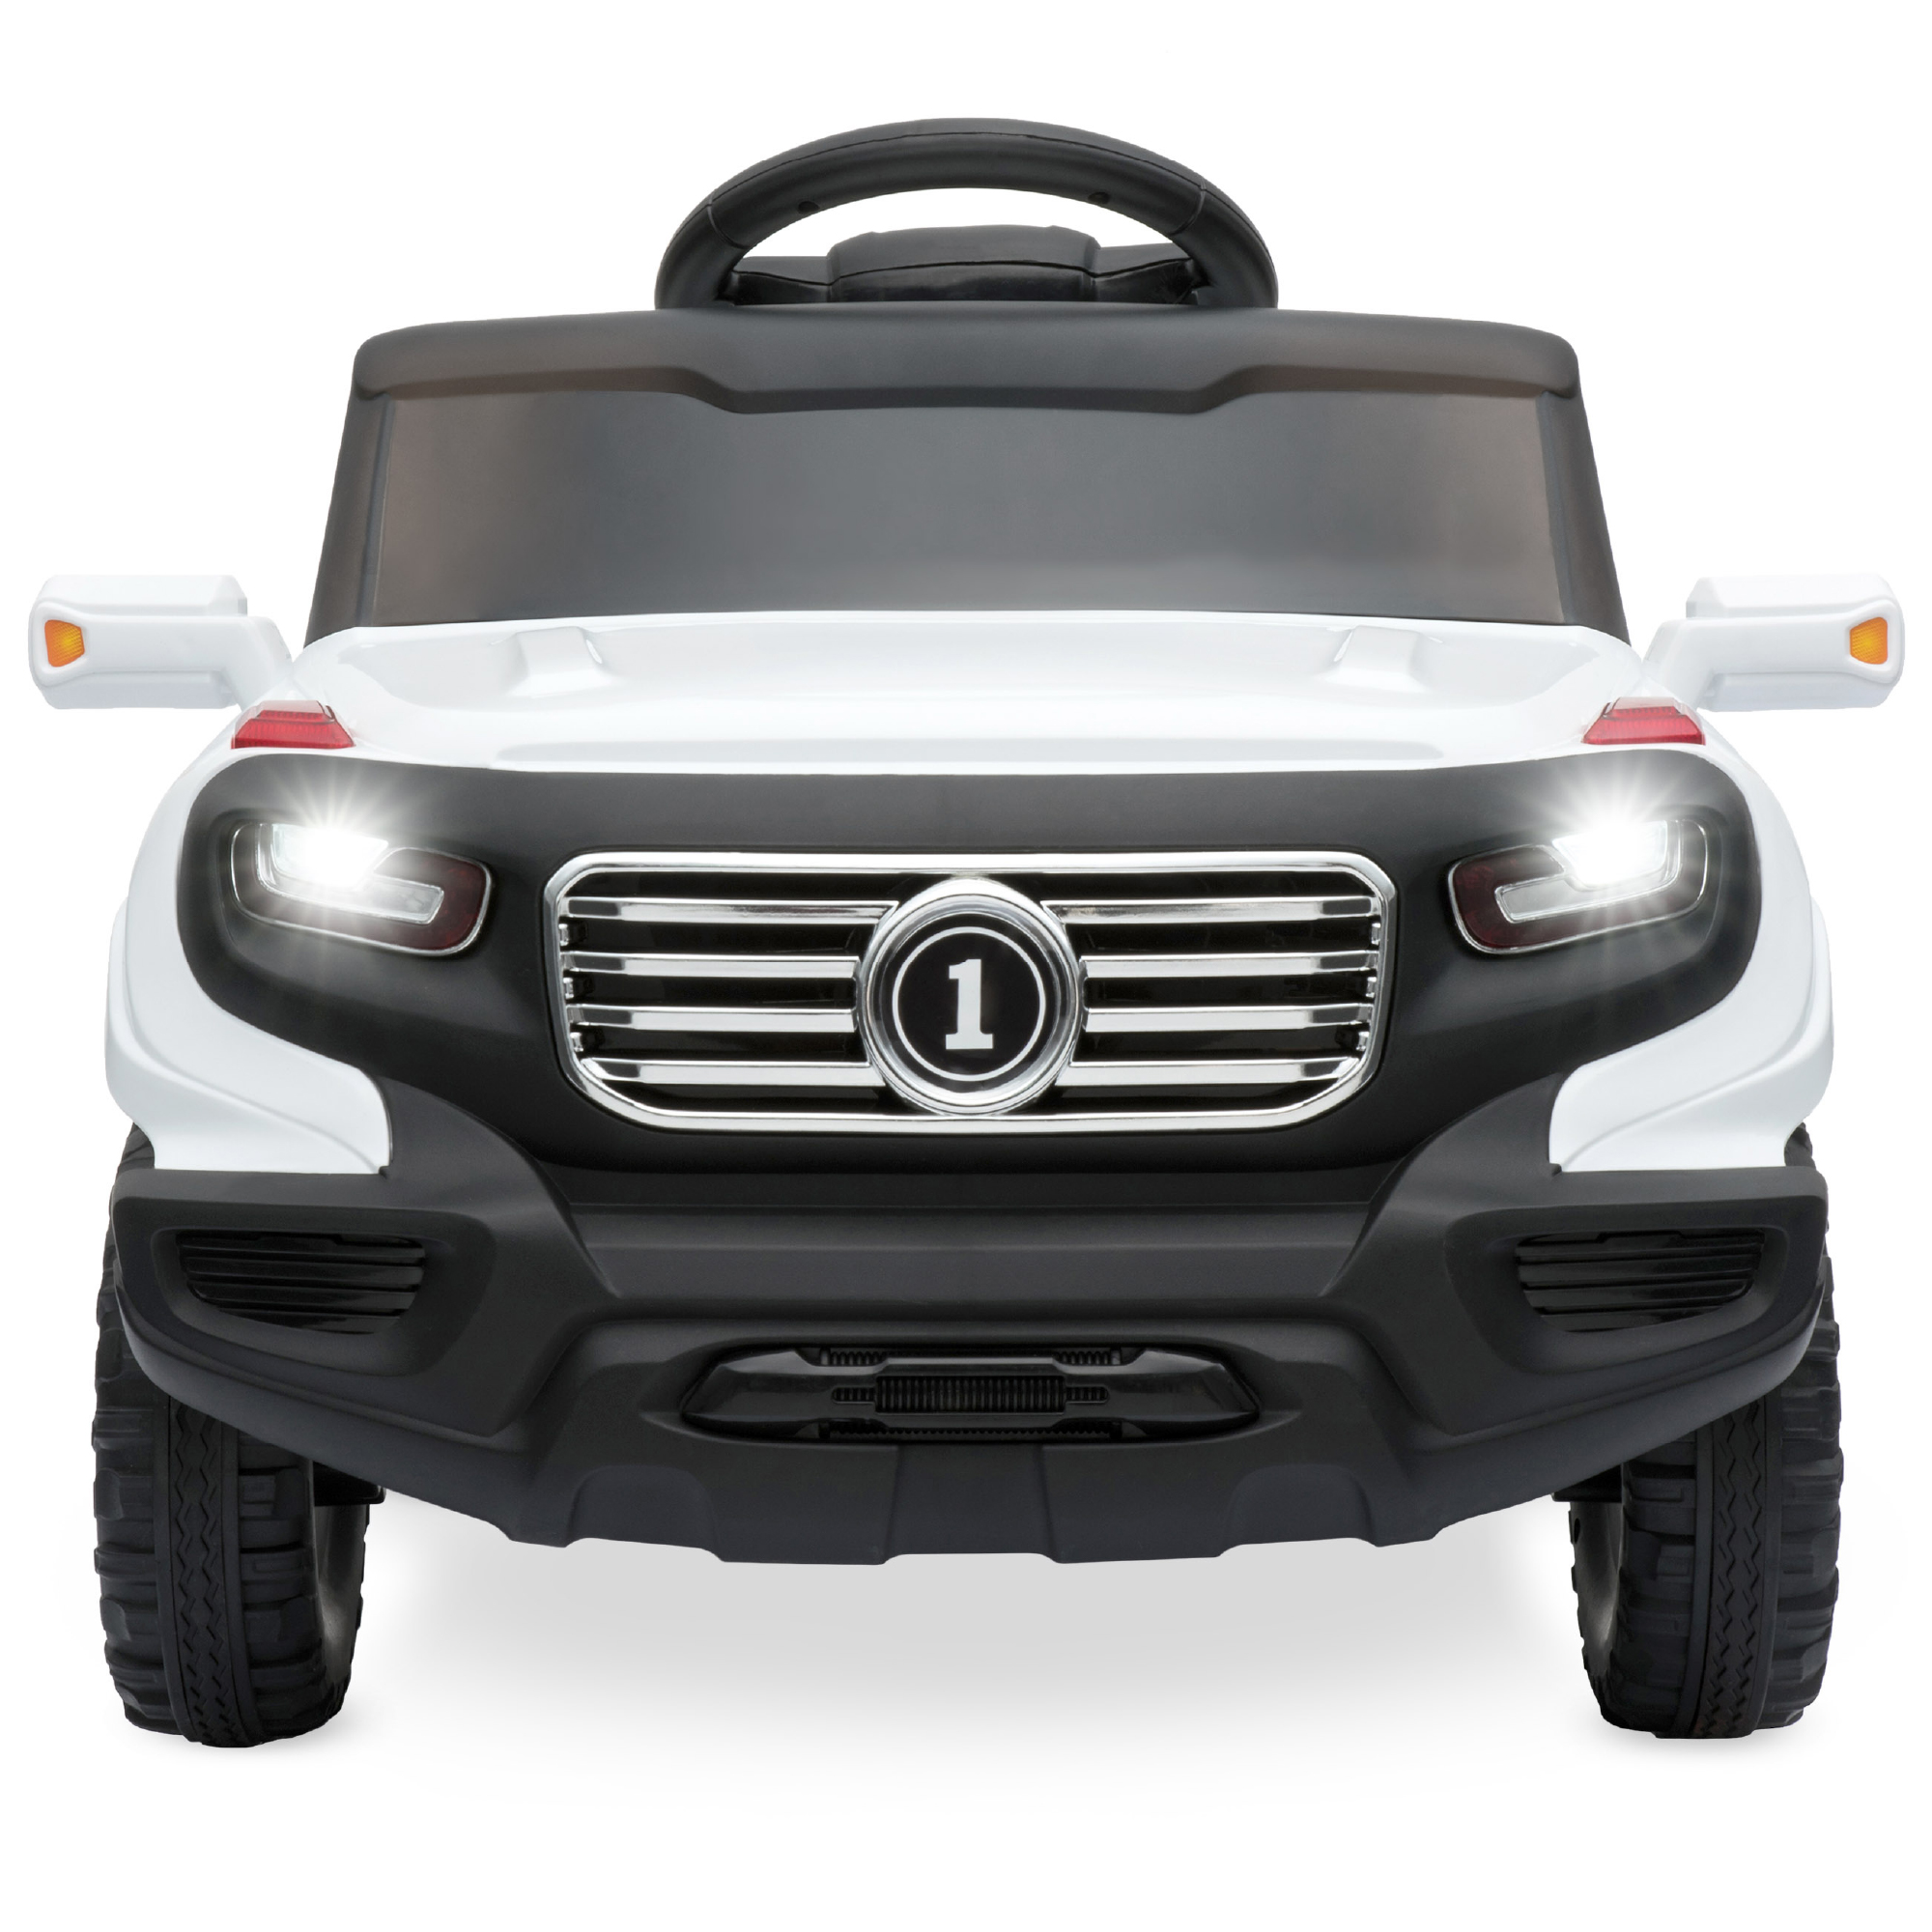 Best Choice Products 6V Ride On Car Truck w/ Parent Control, 3 Speeds, LED Lights, MP3 Player - White - image 2 of 7